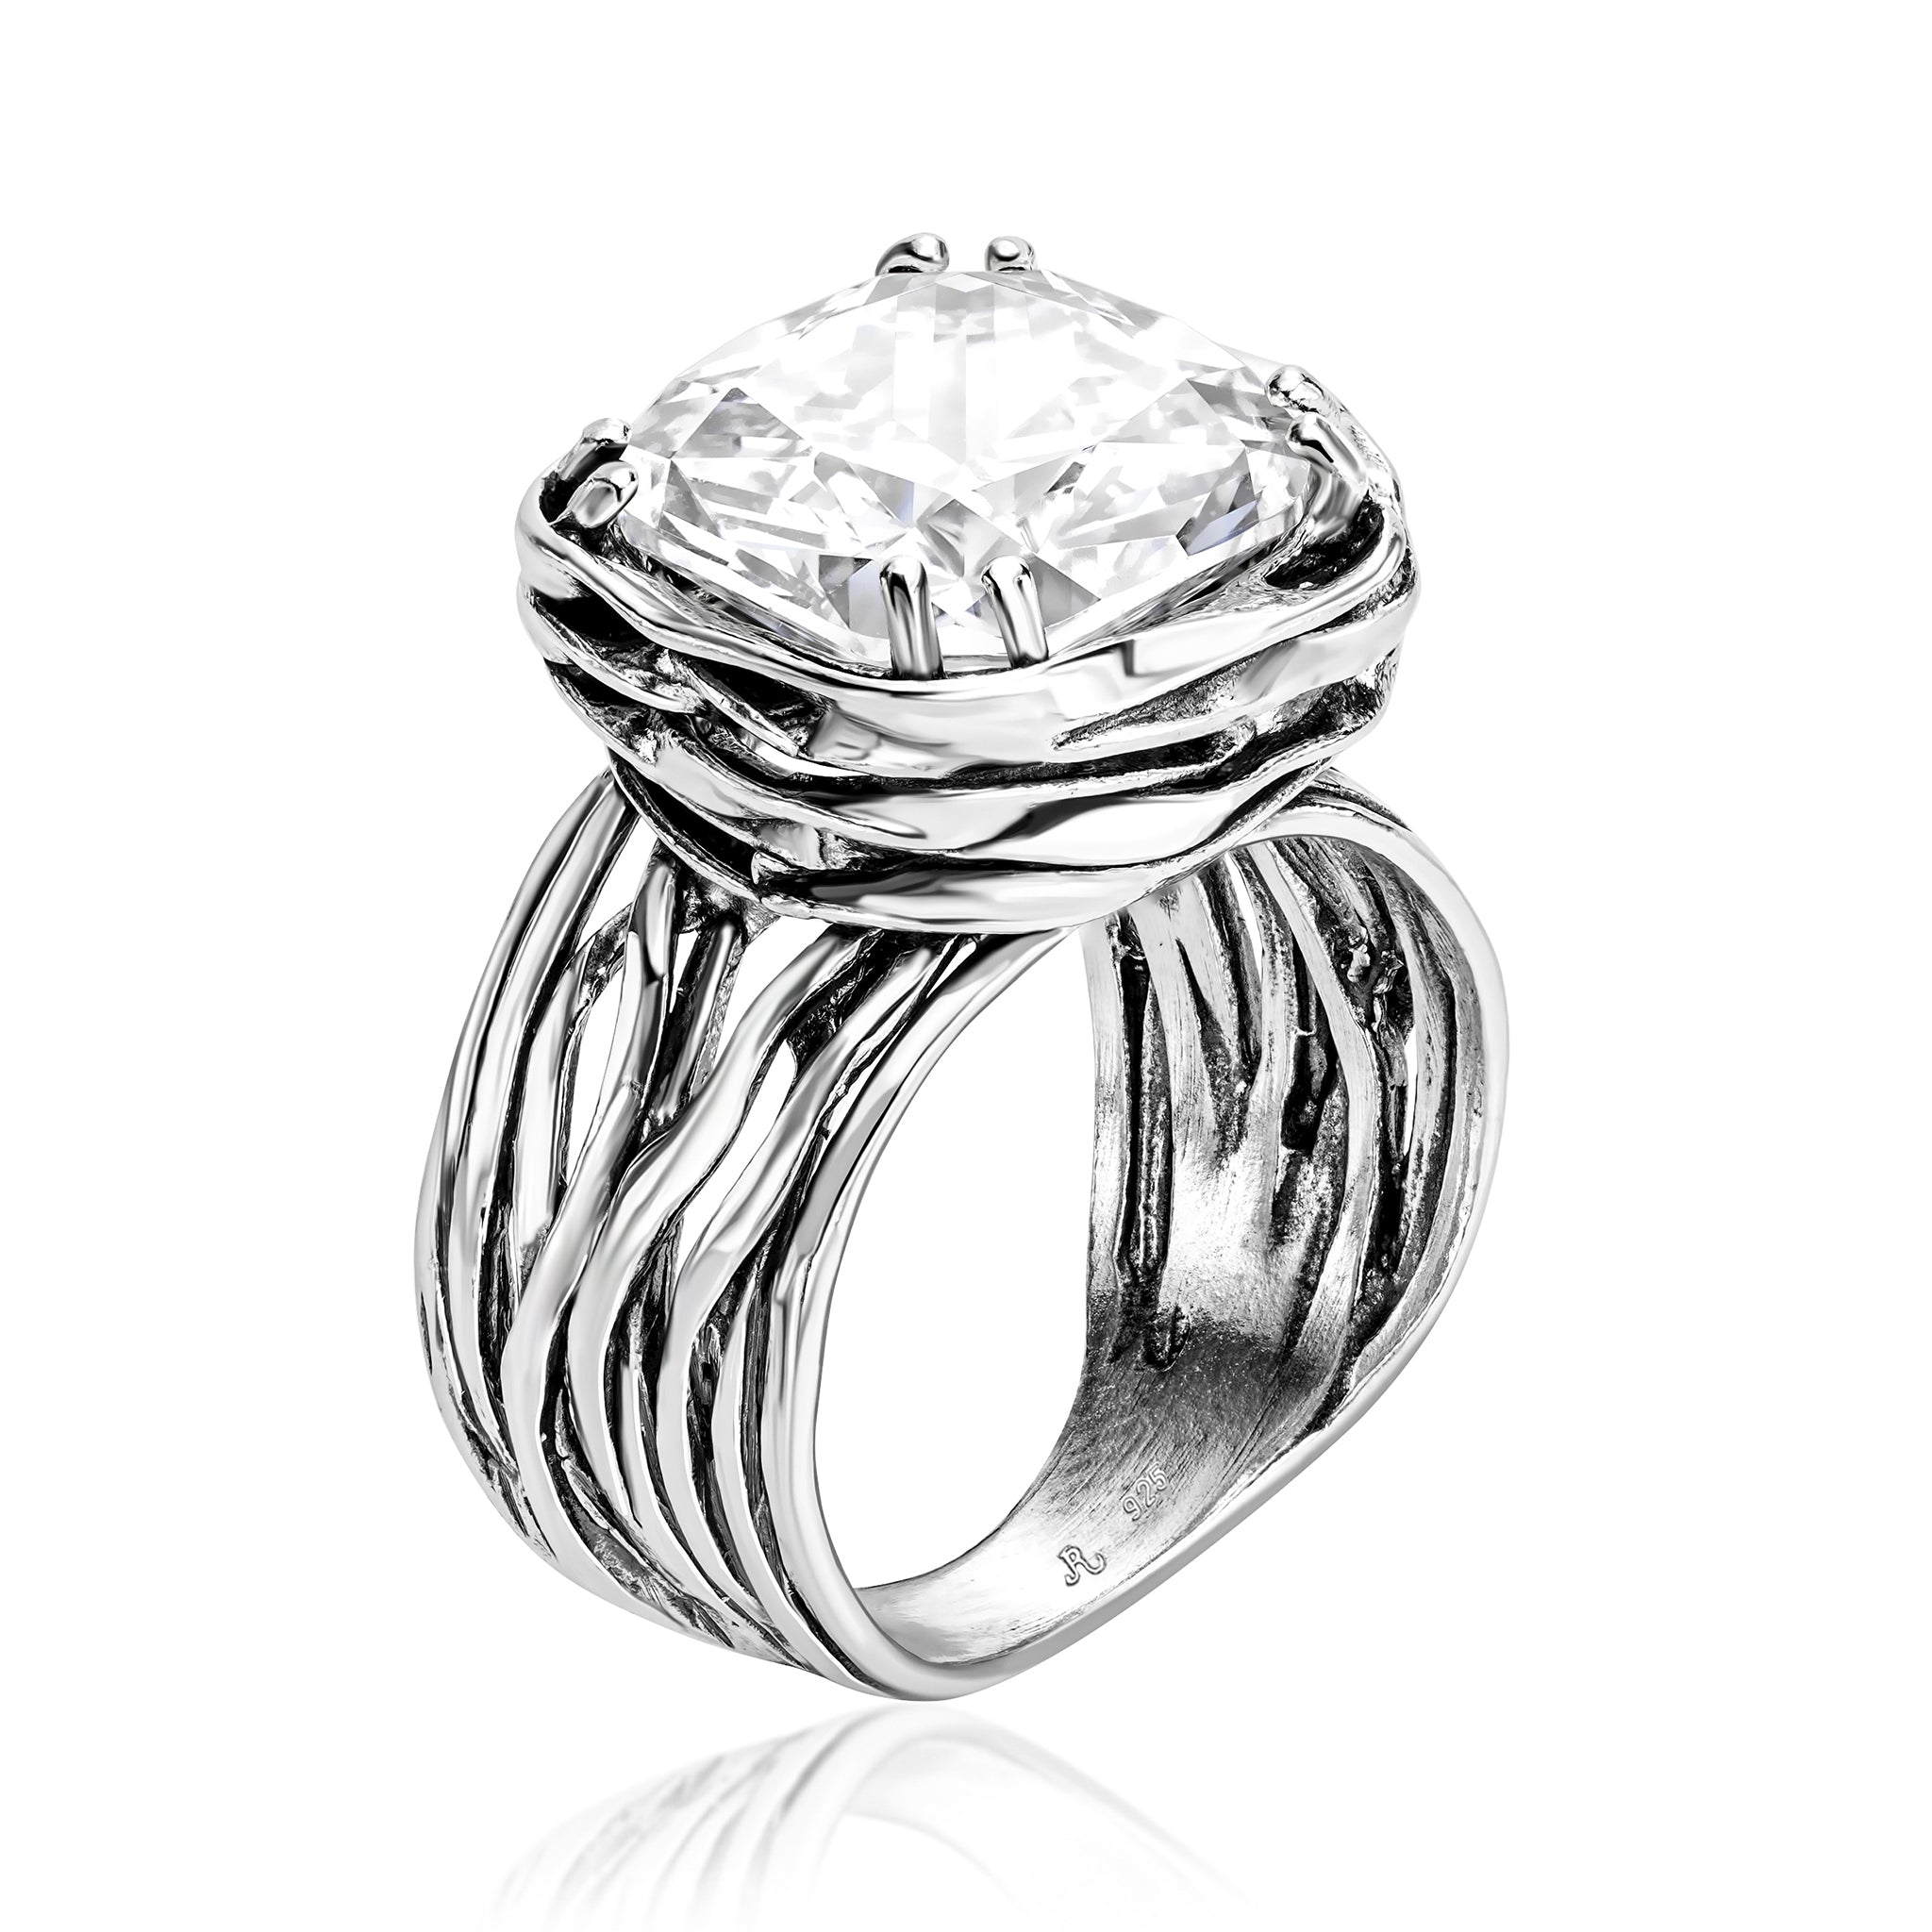 Statement Sterling Silver CZ Wrap Ring